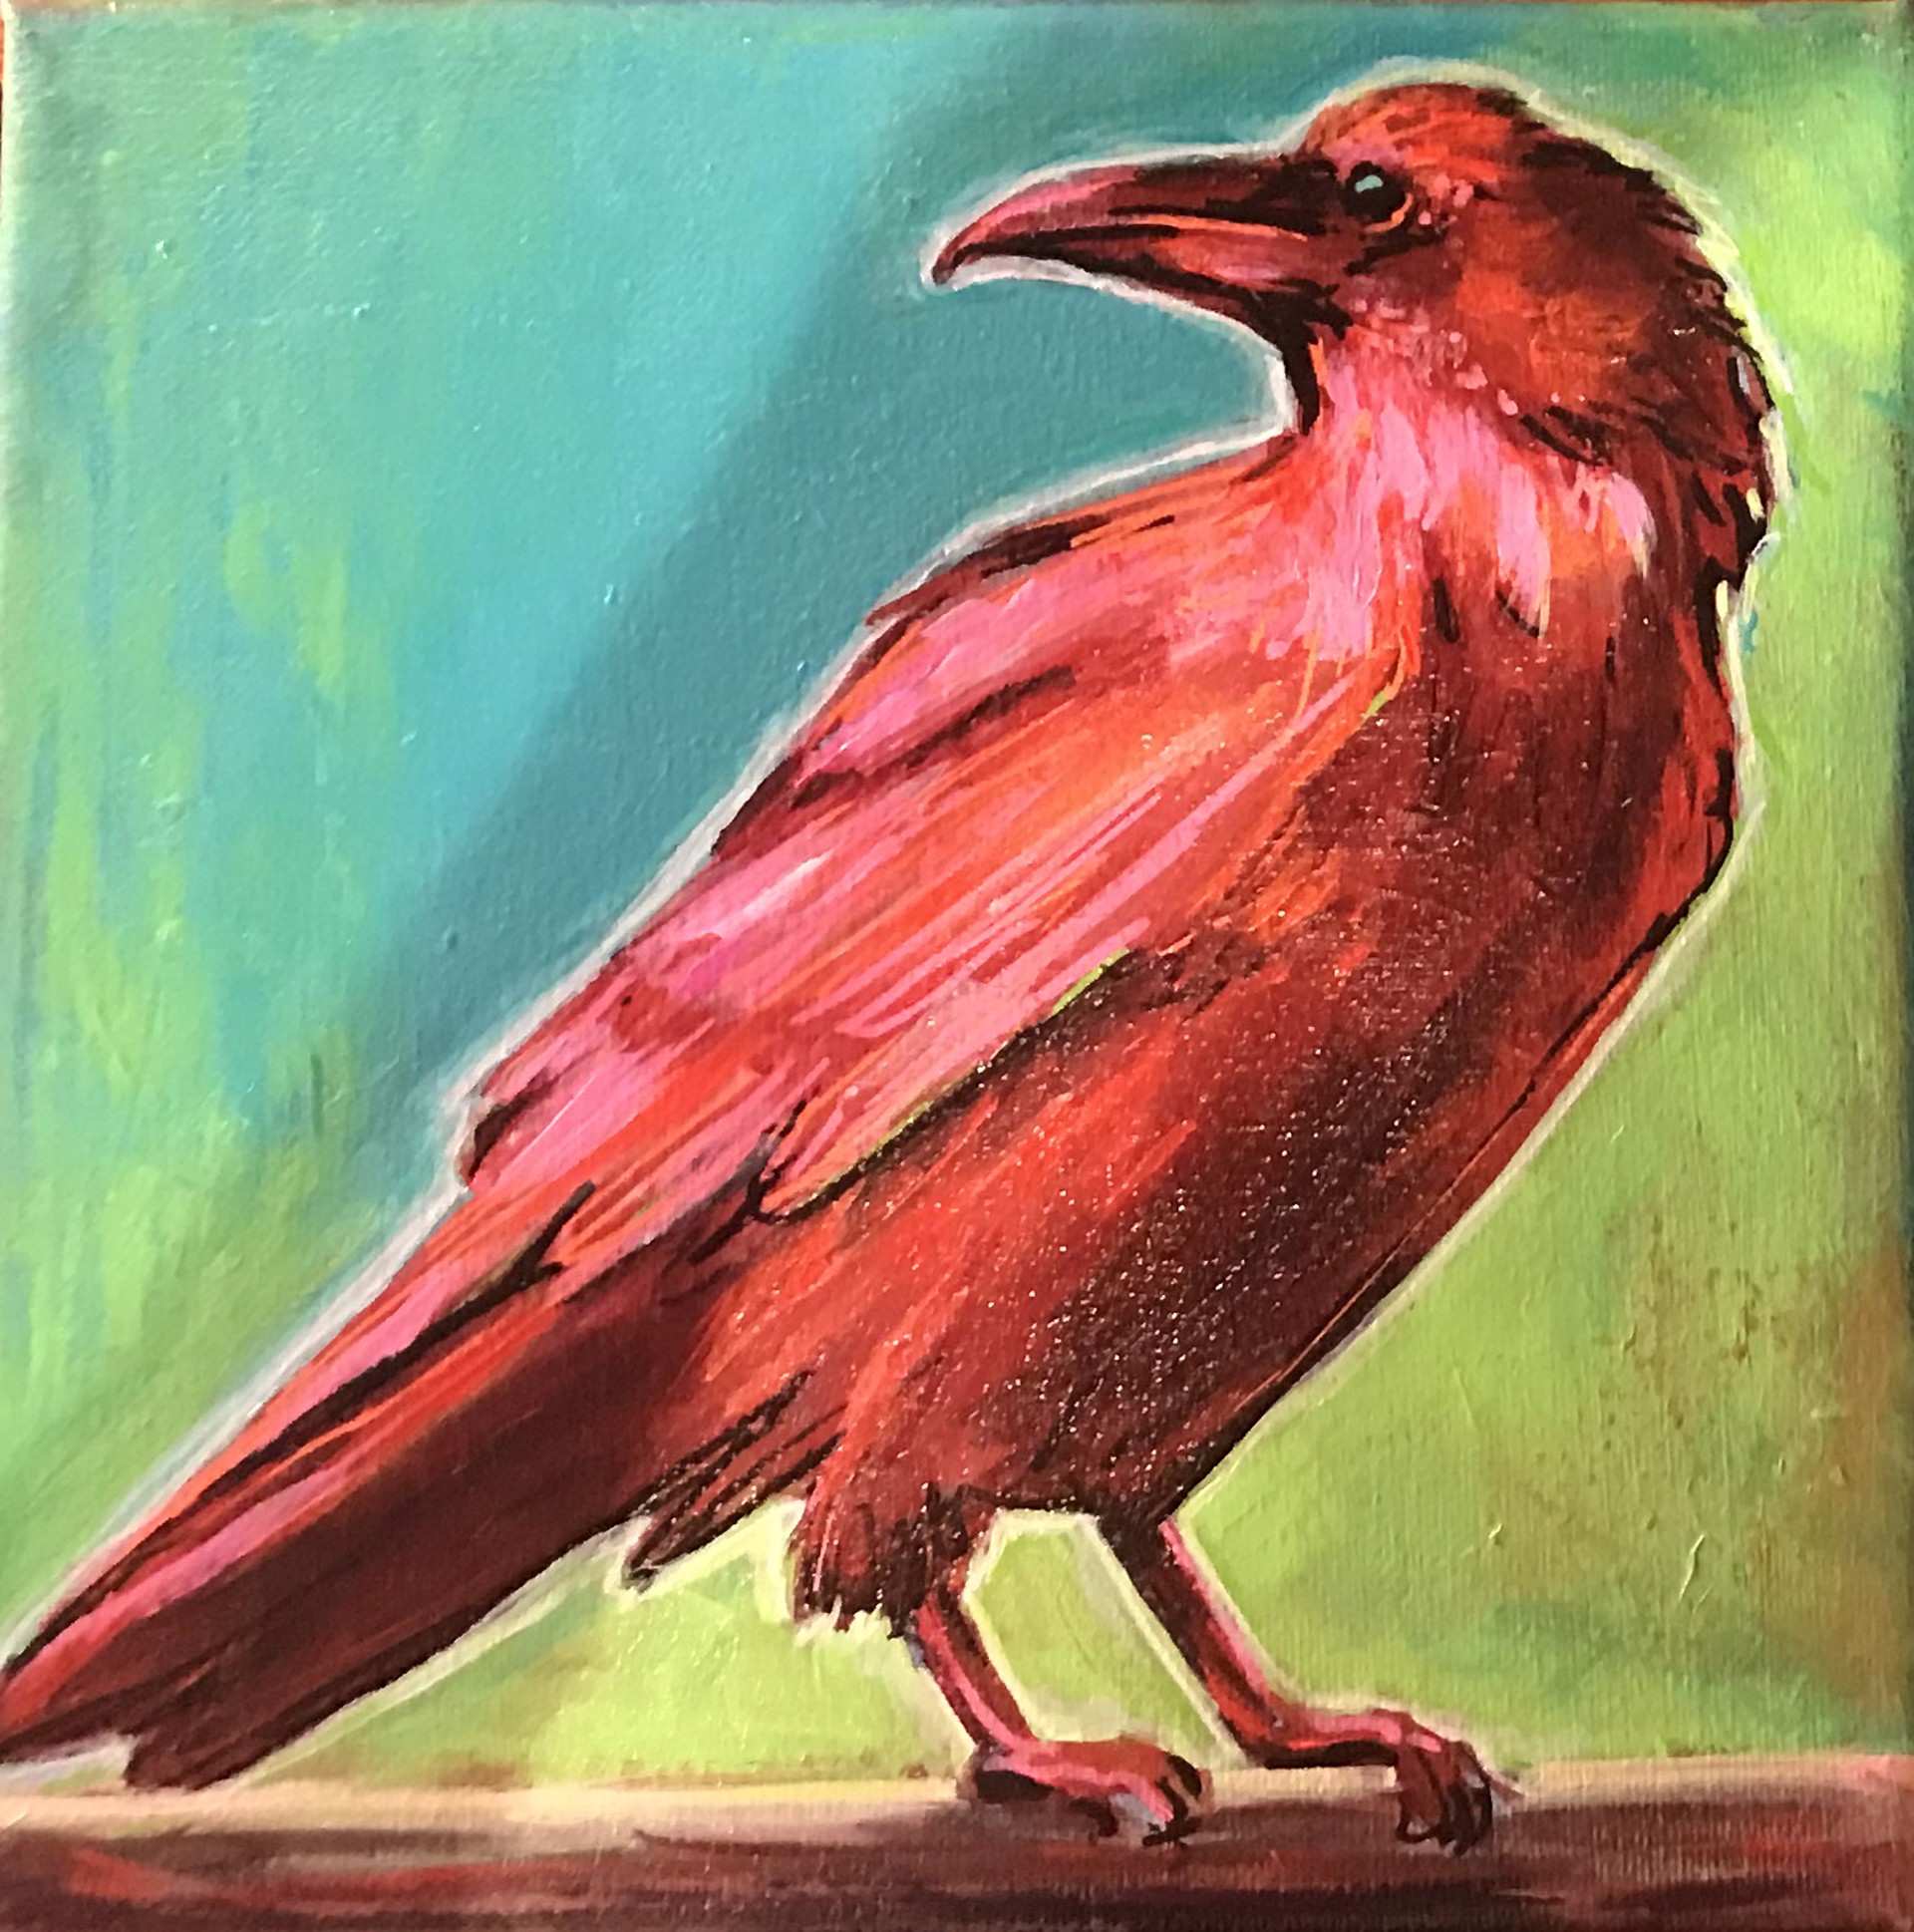 Red Raven by Cindy Anderson